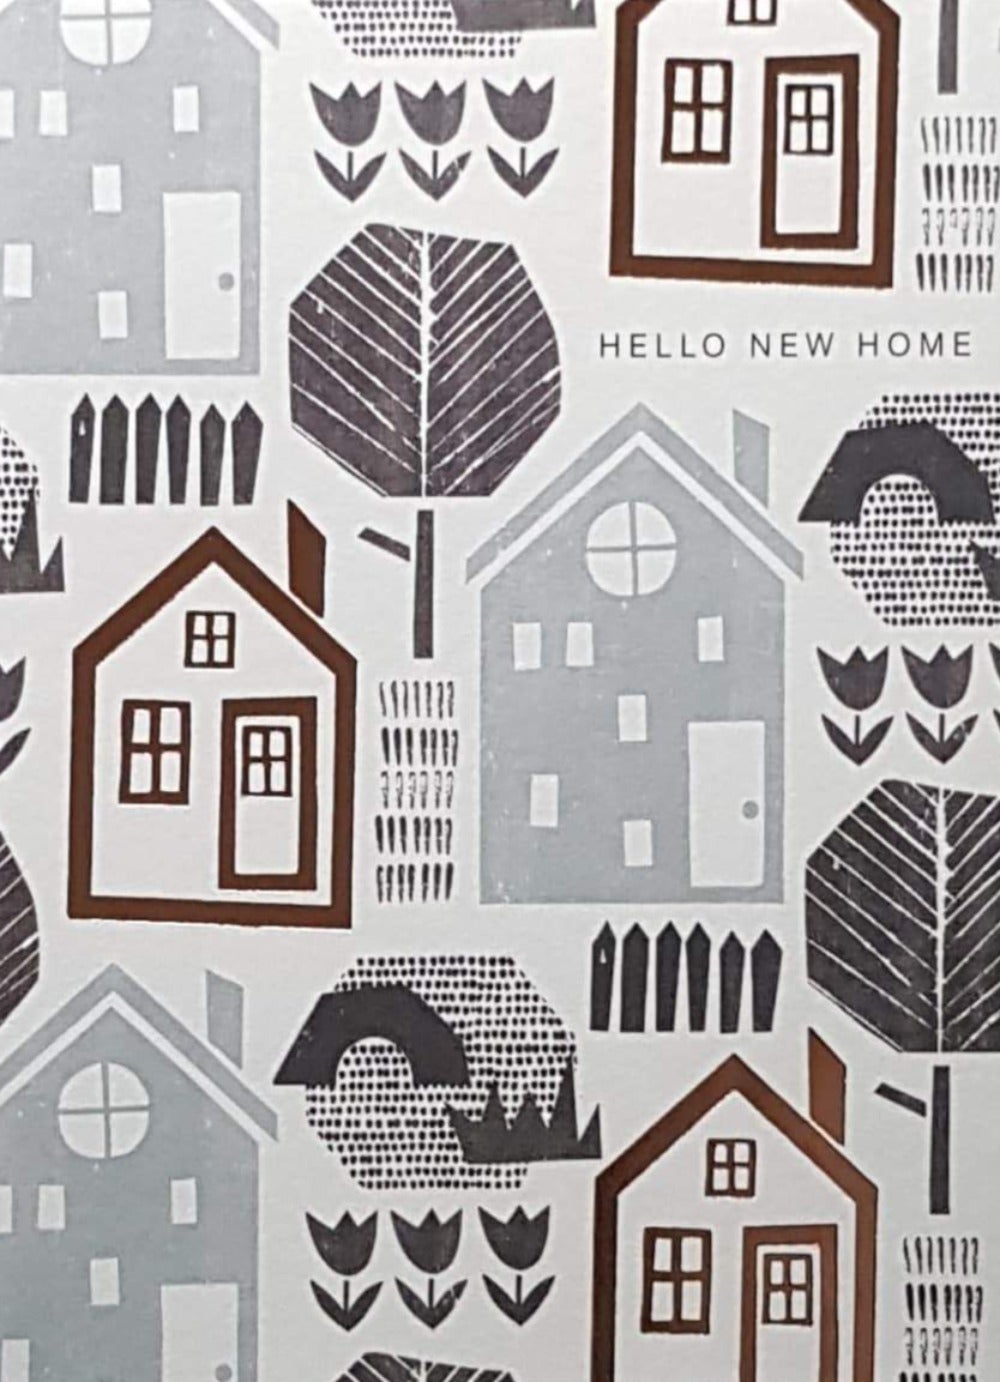 Congratulations Card - New Home / 'Hello New Home' & Houses And Trees